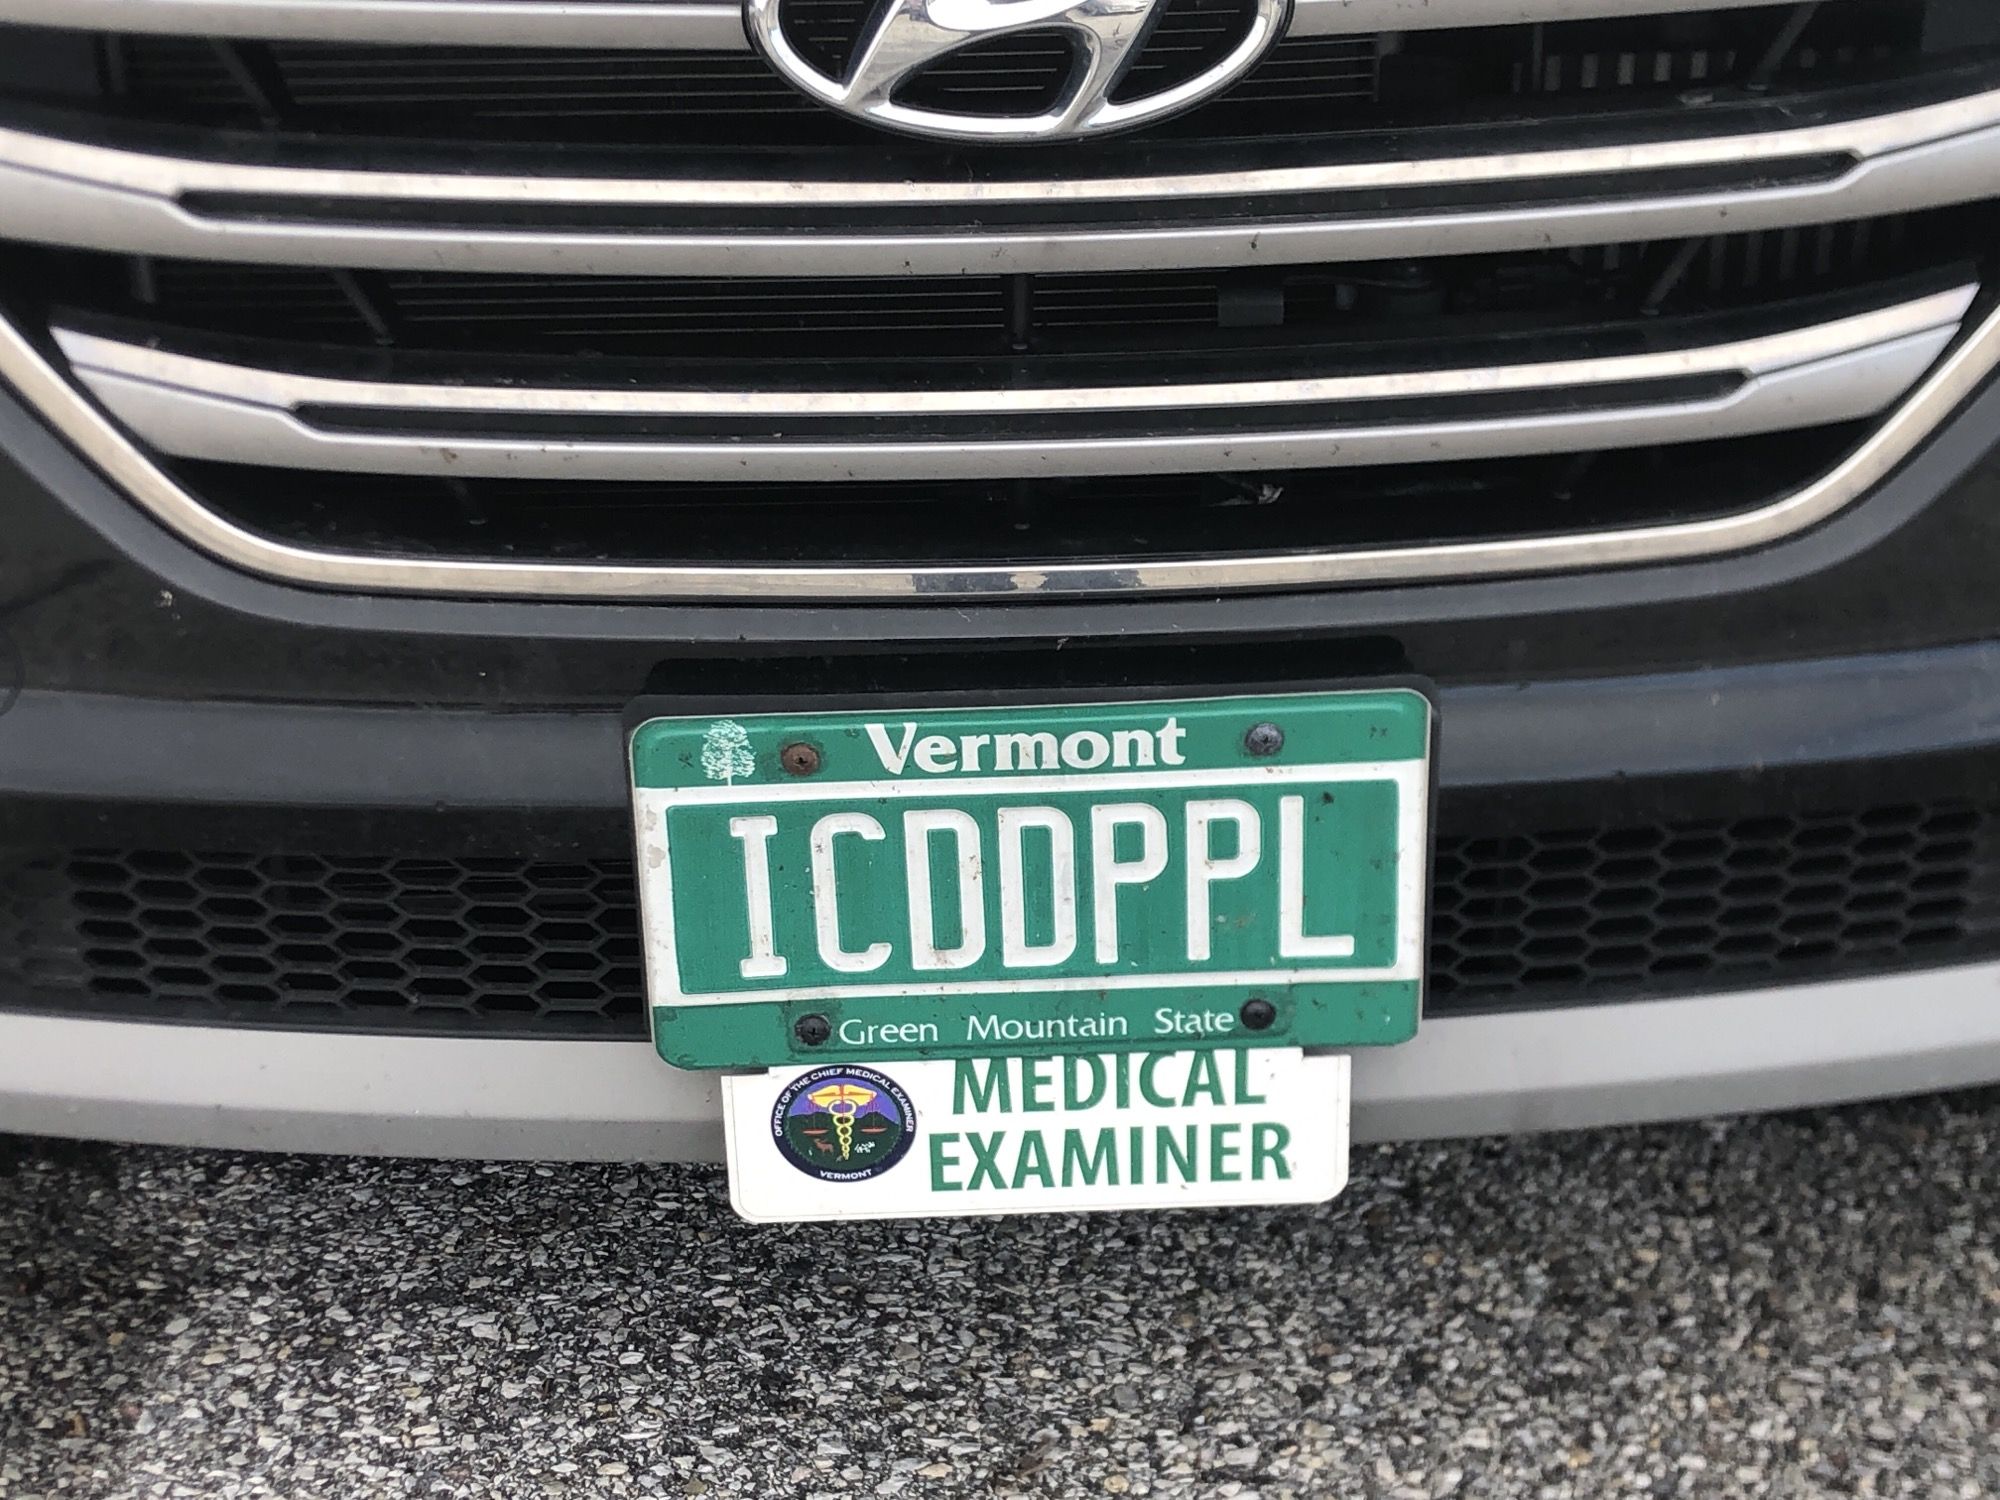 This medical examiner’s license plate